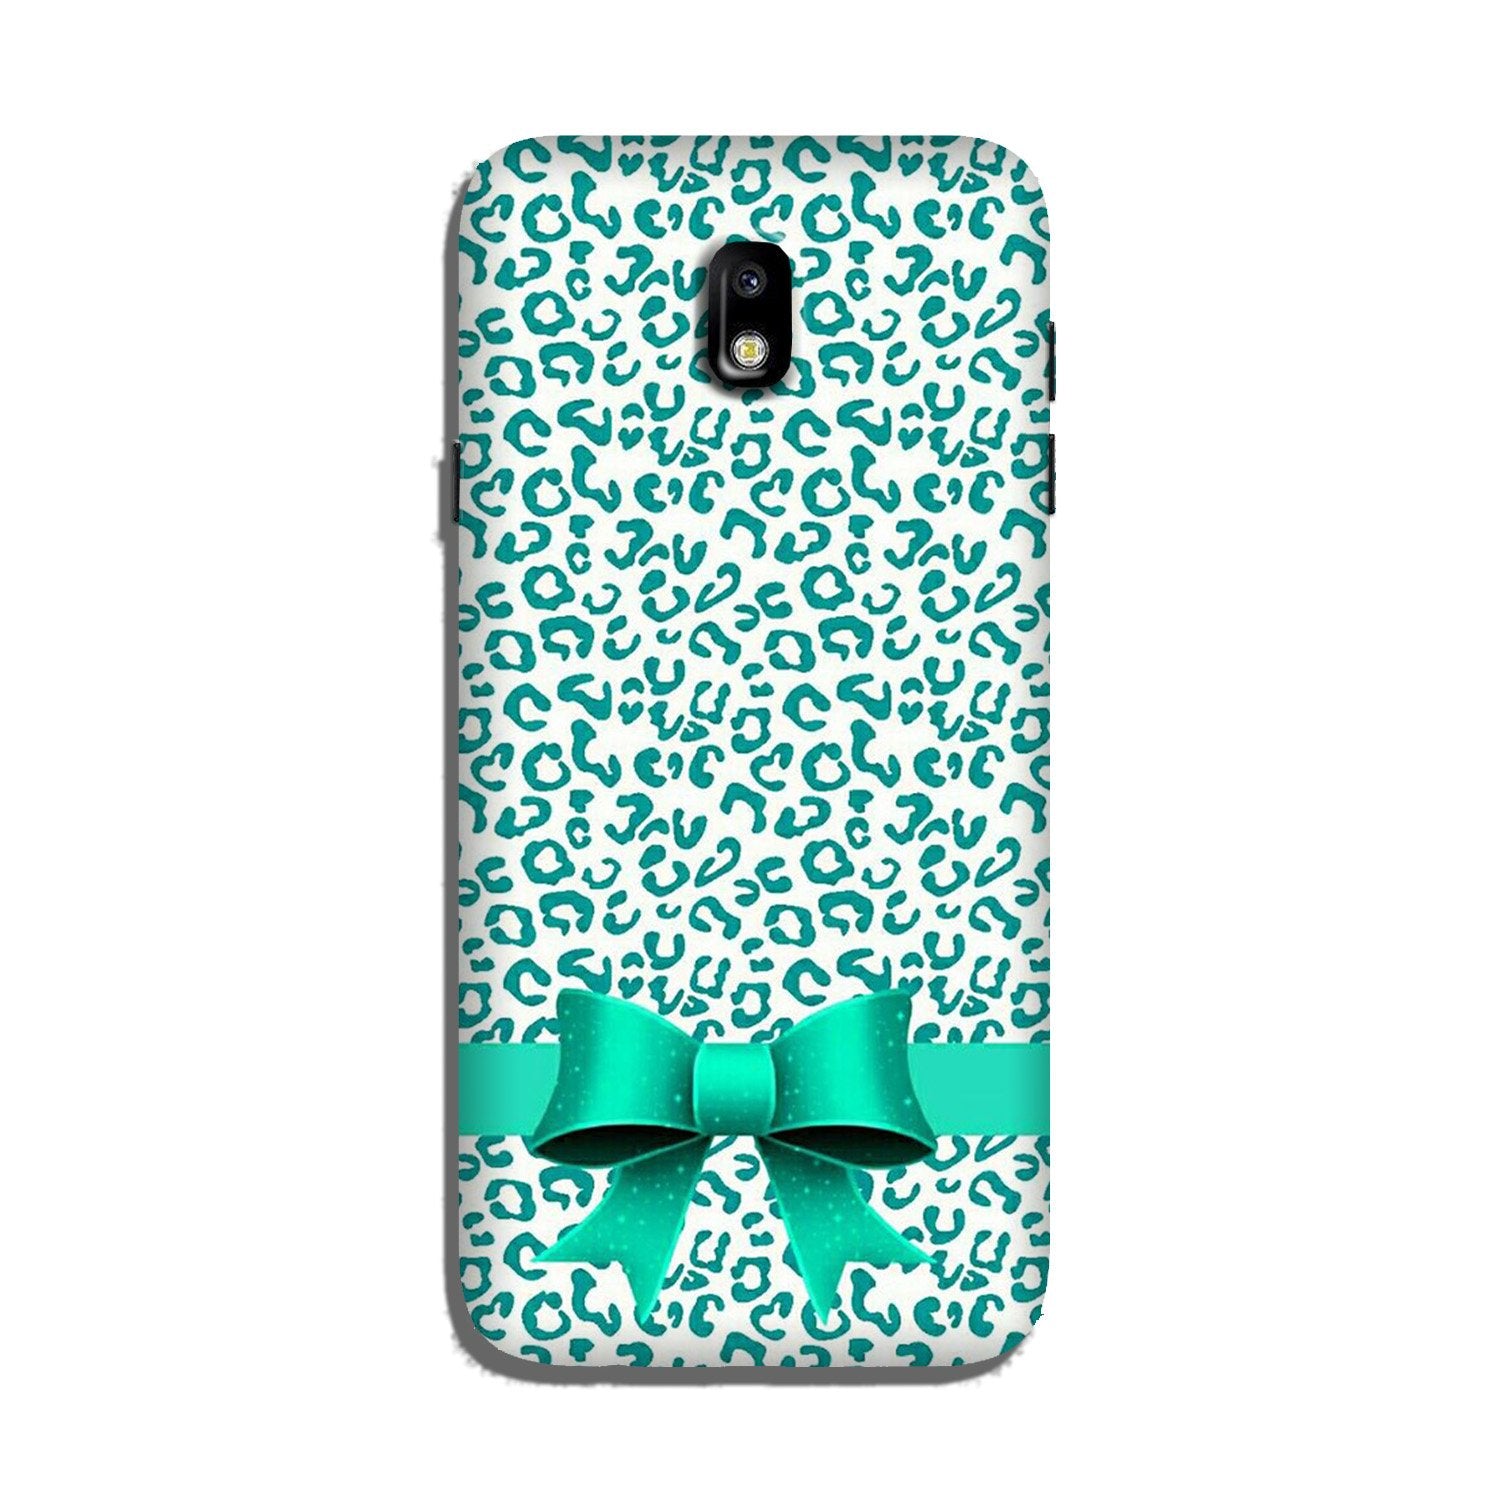 Gift Wrap6 Case for Galaxy J5 Pro